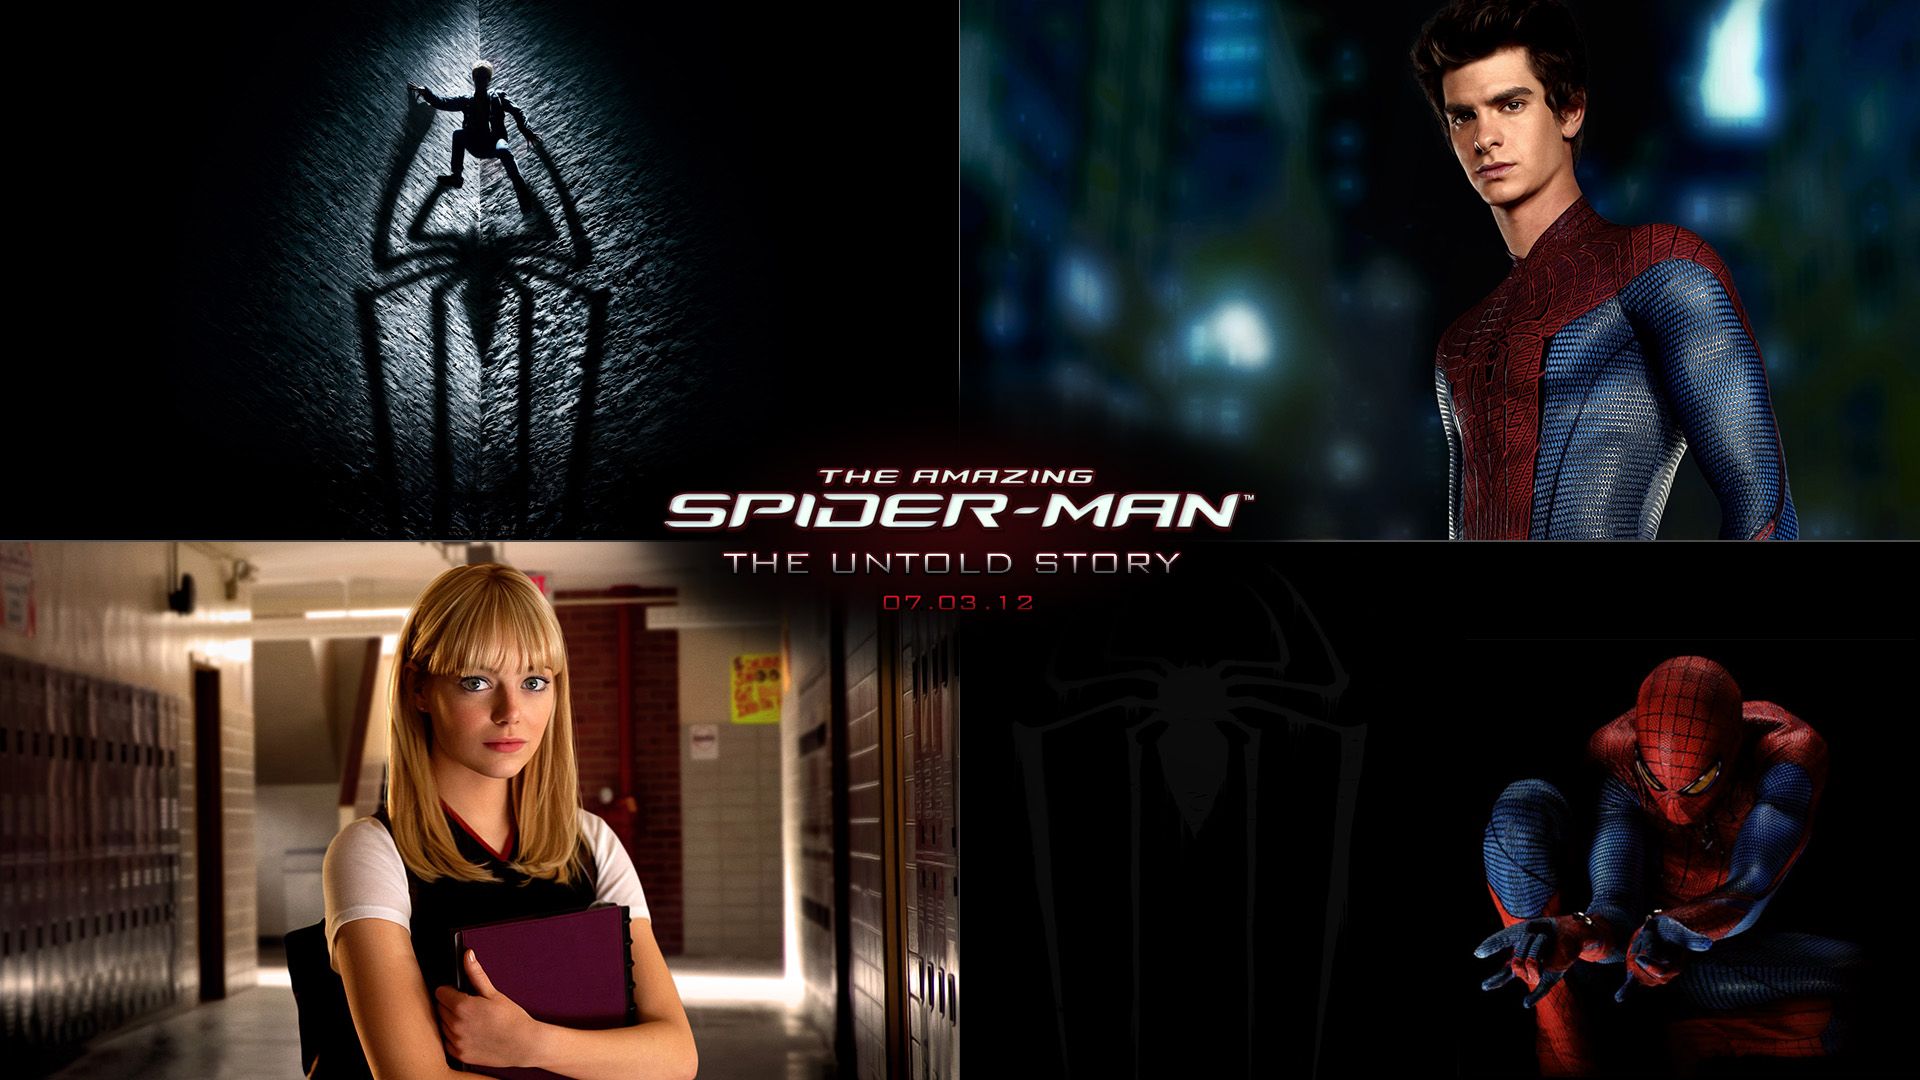 The Amazing Spider-Man Collage Wallpaper - Upcoming Movies ...